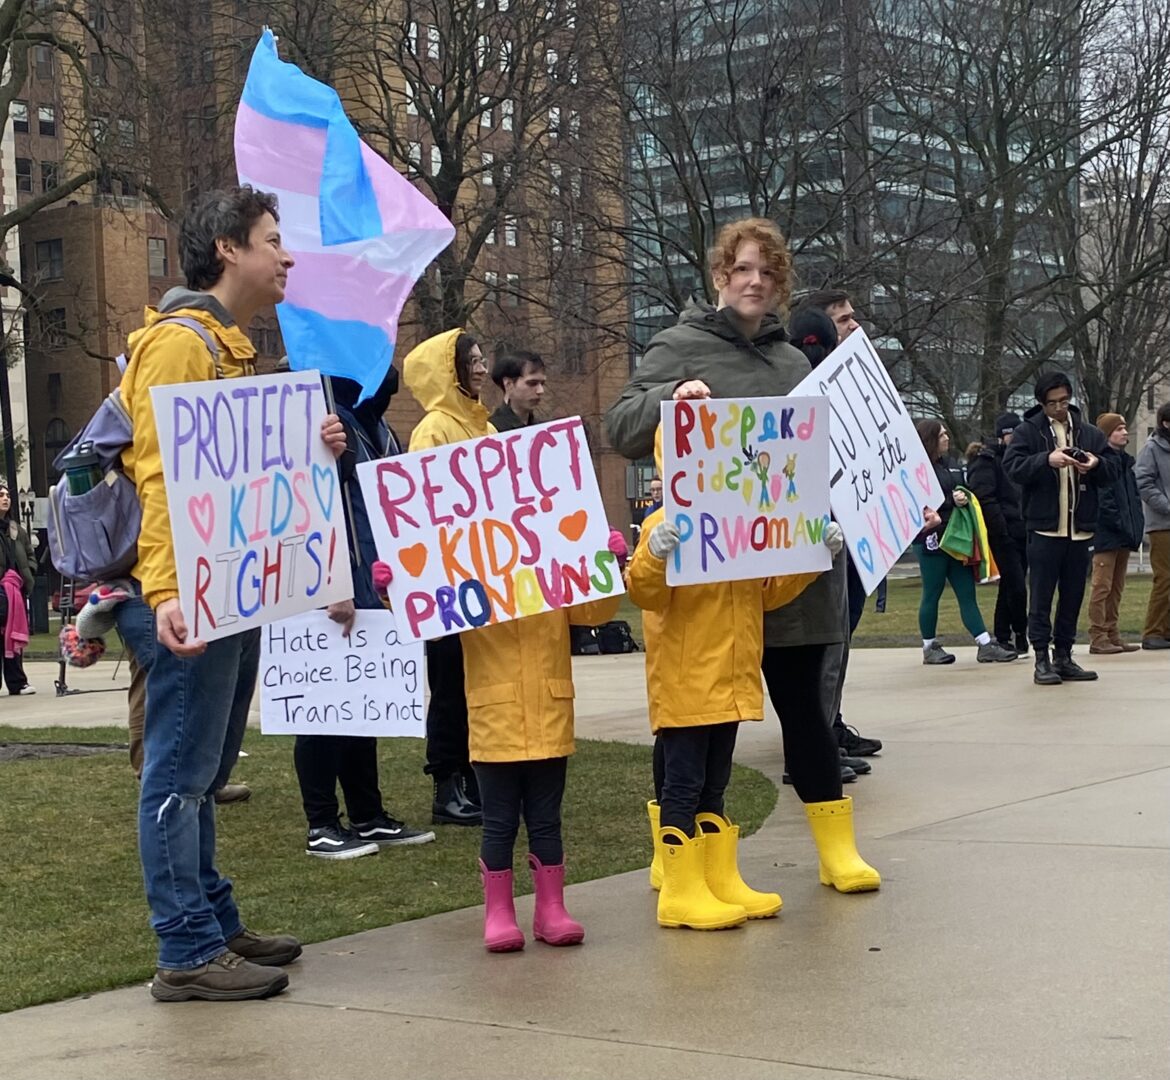 A family of four with homemade signs made by each family member that say "protect kids rights"